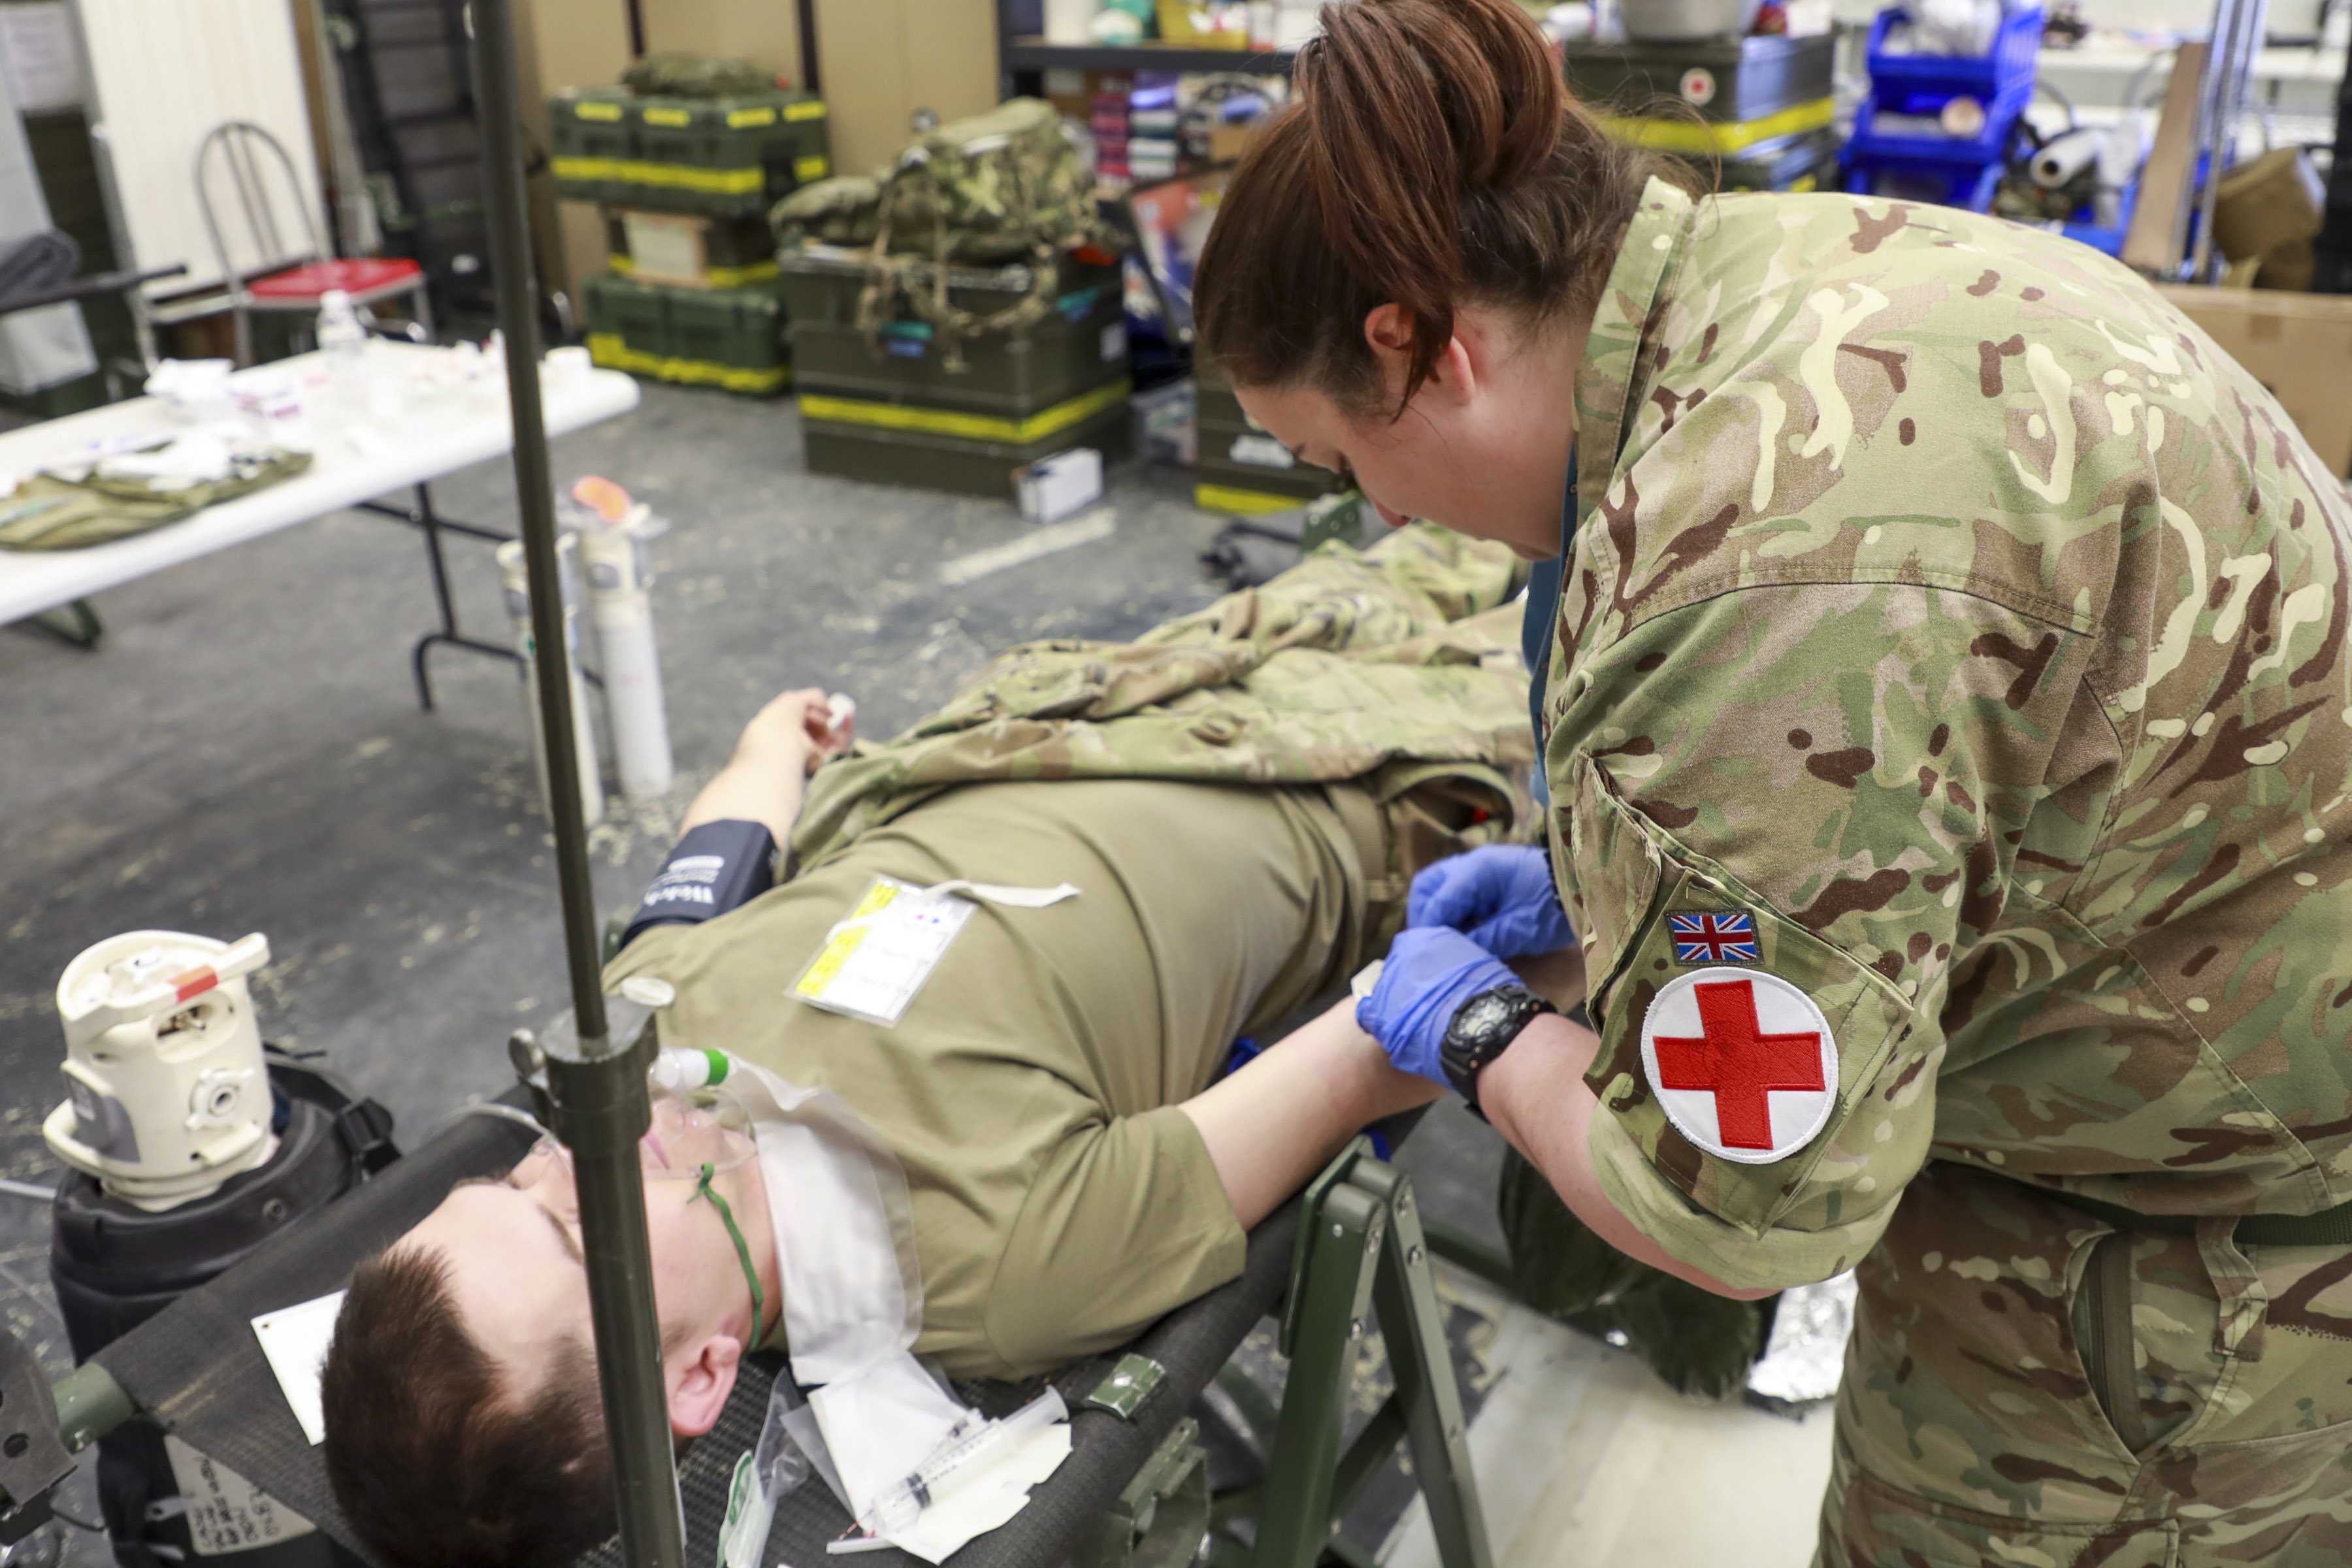 Medical personnel works with casualty.